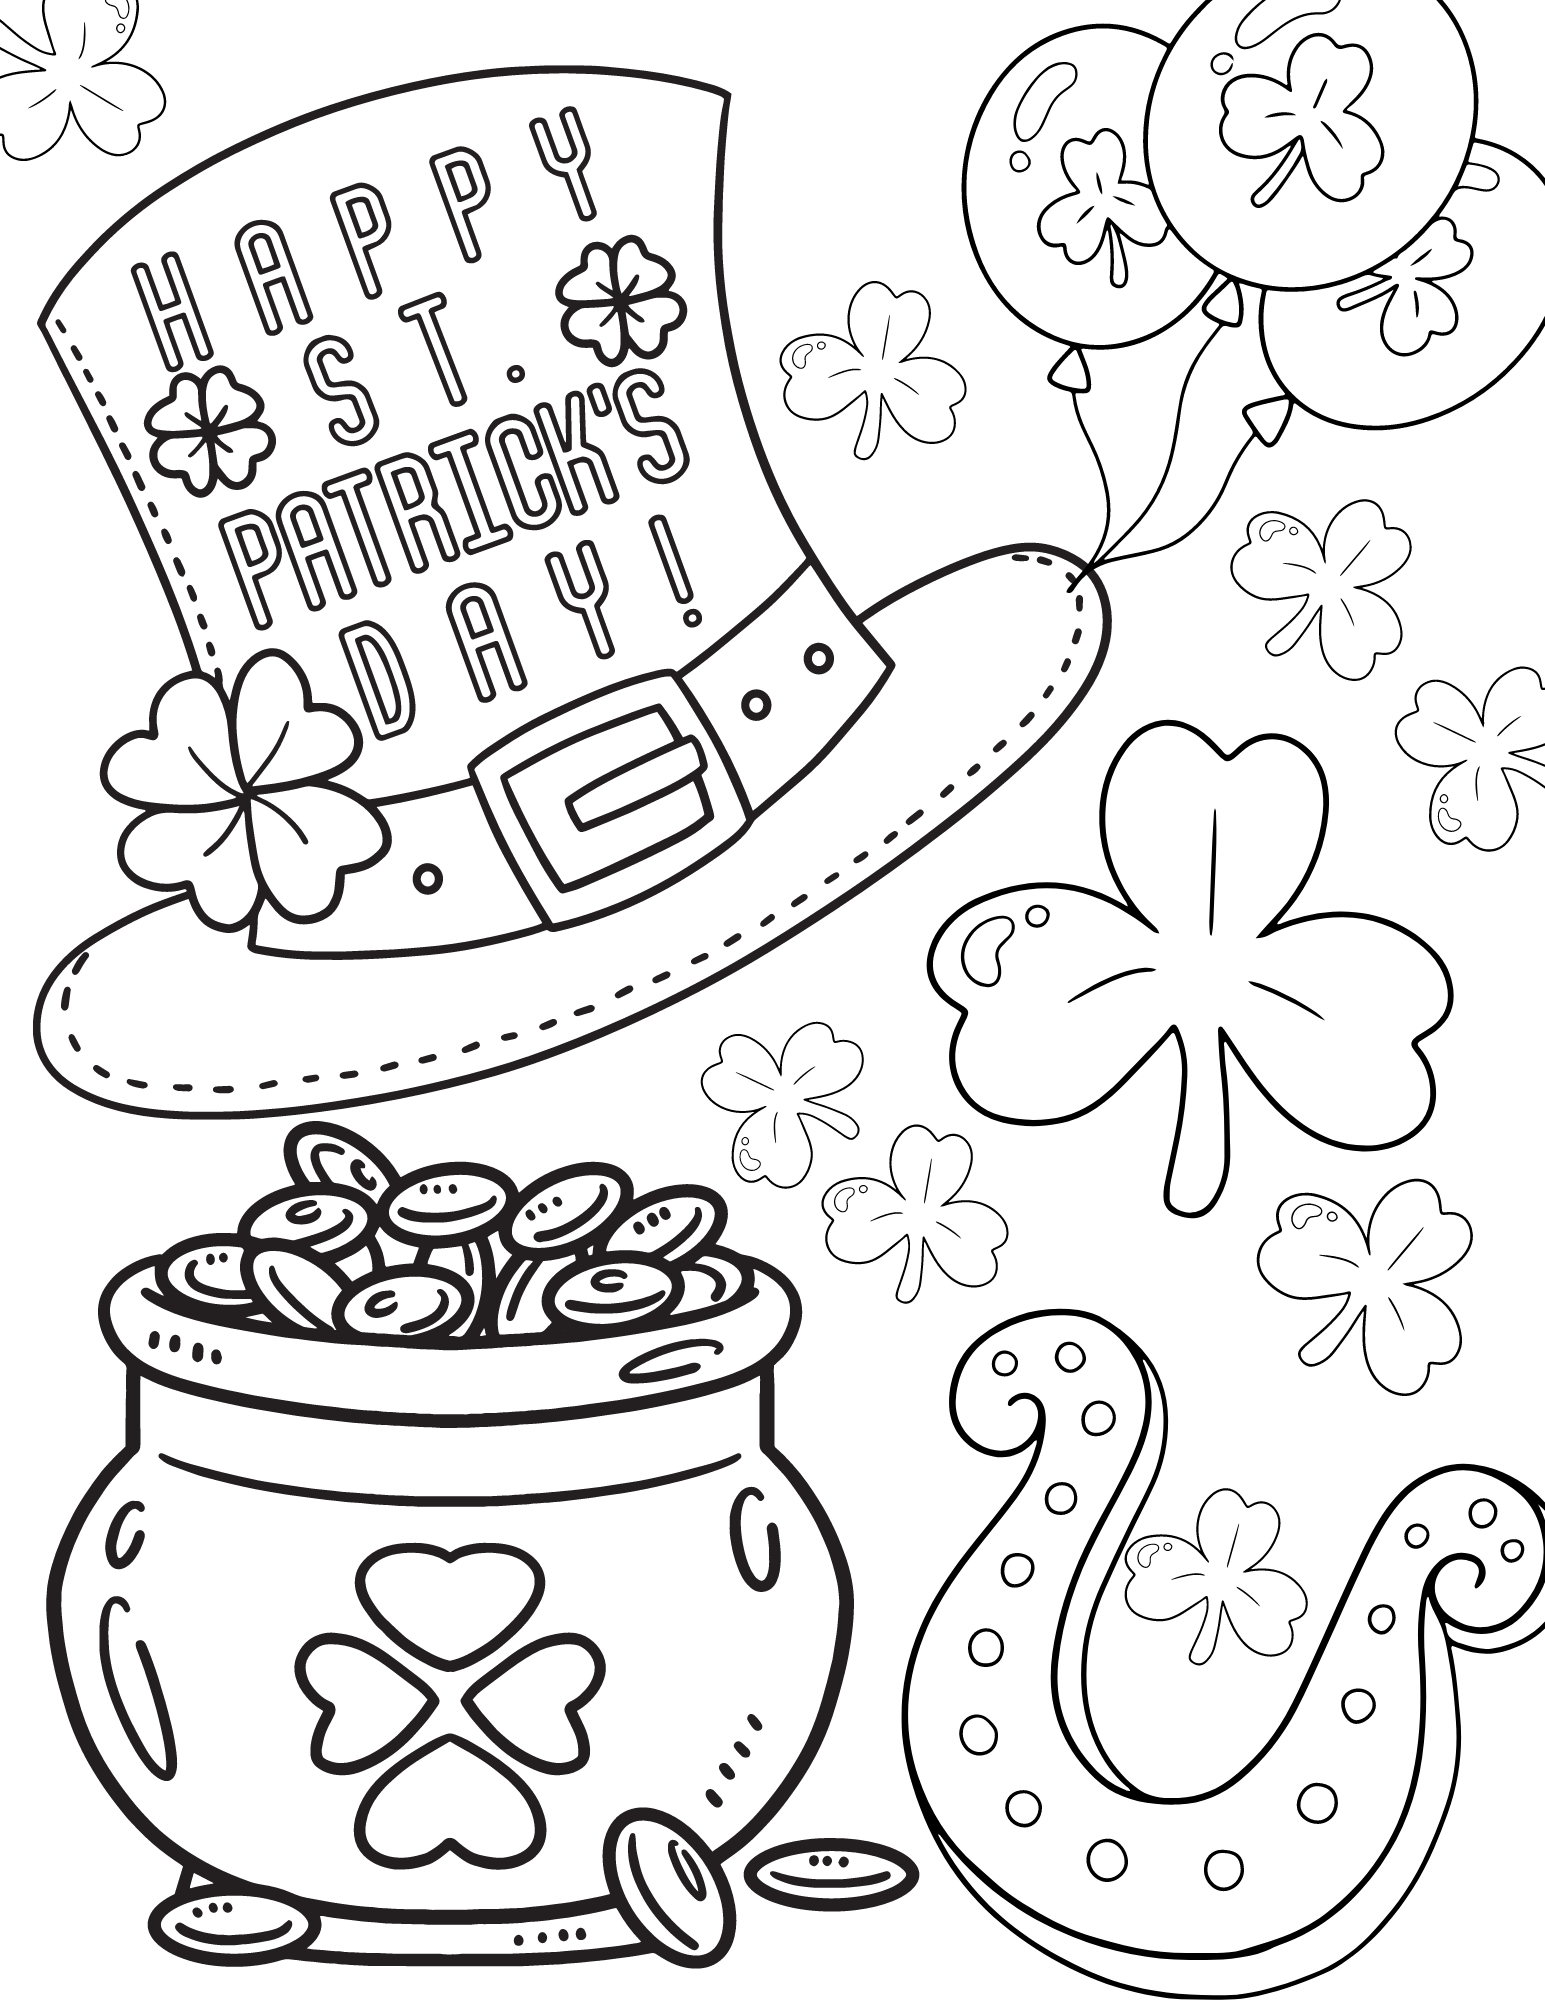 26+ Happy Birthday Card Coloring Pages